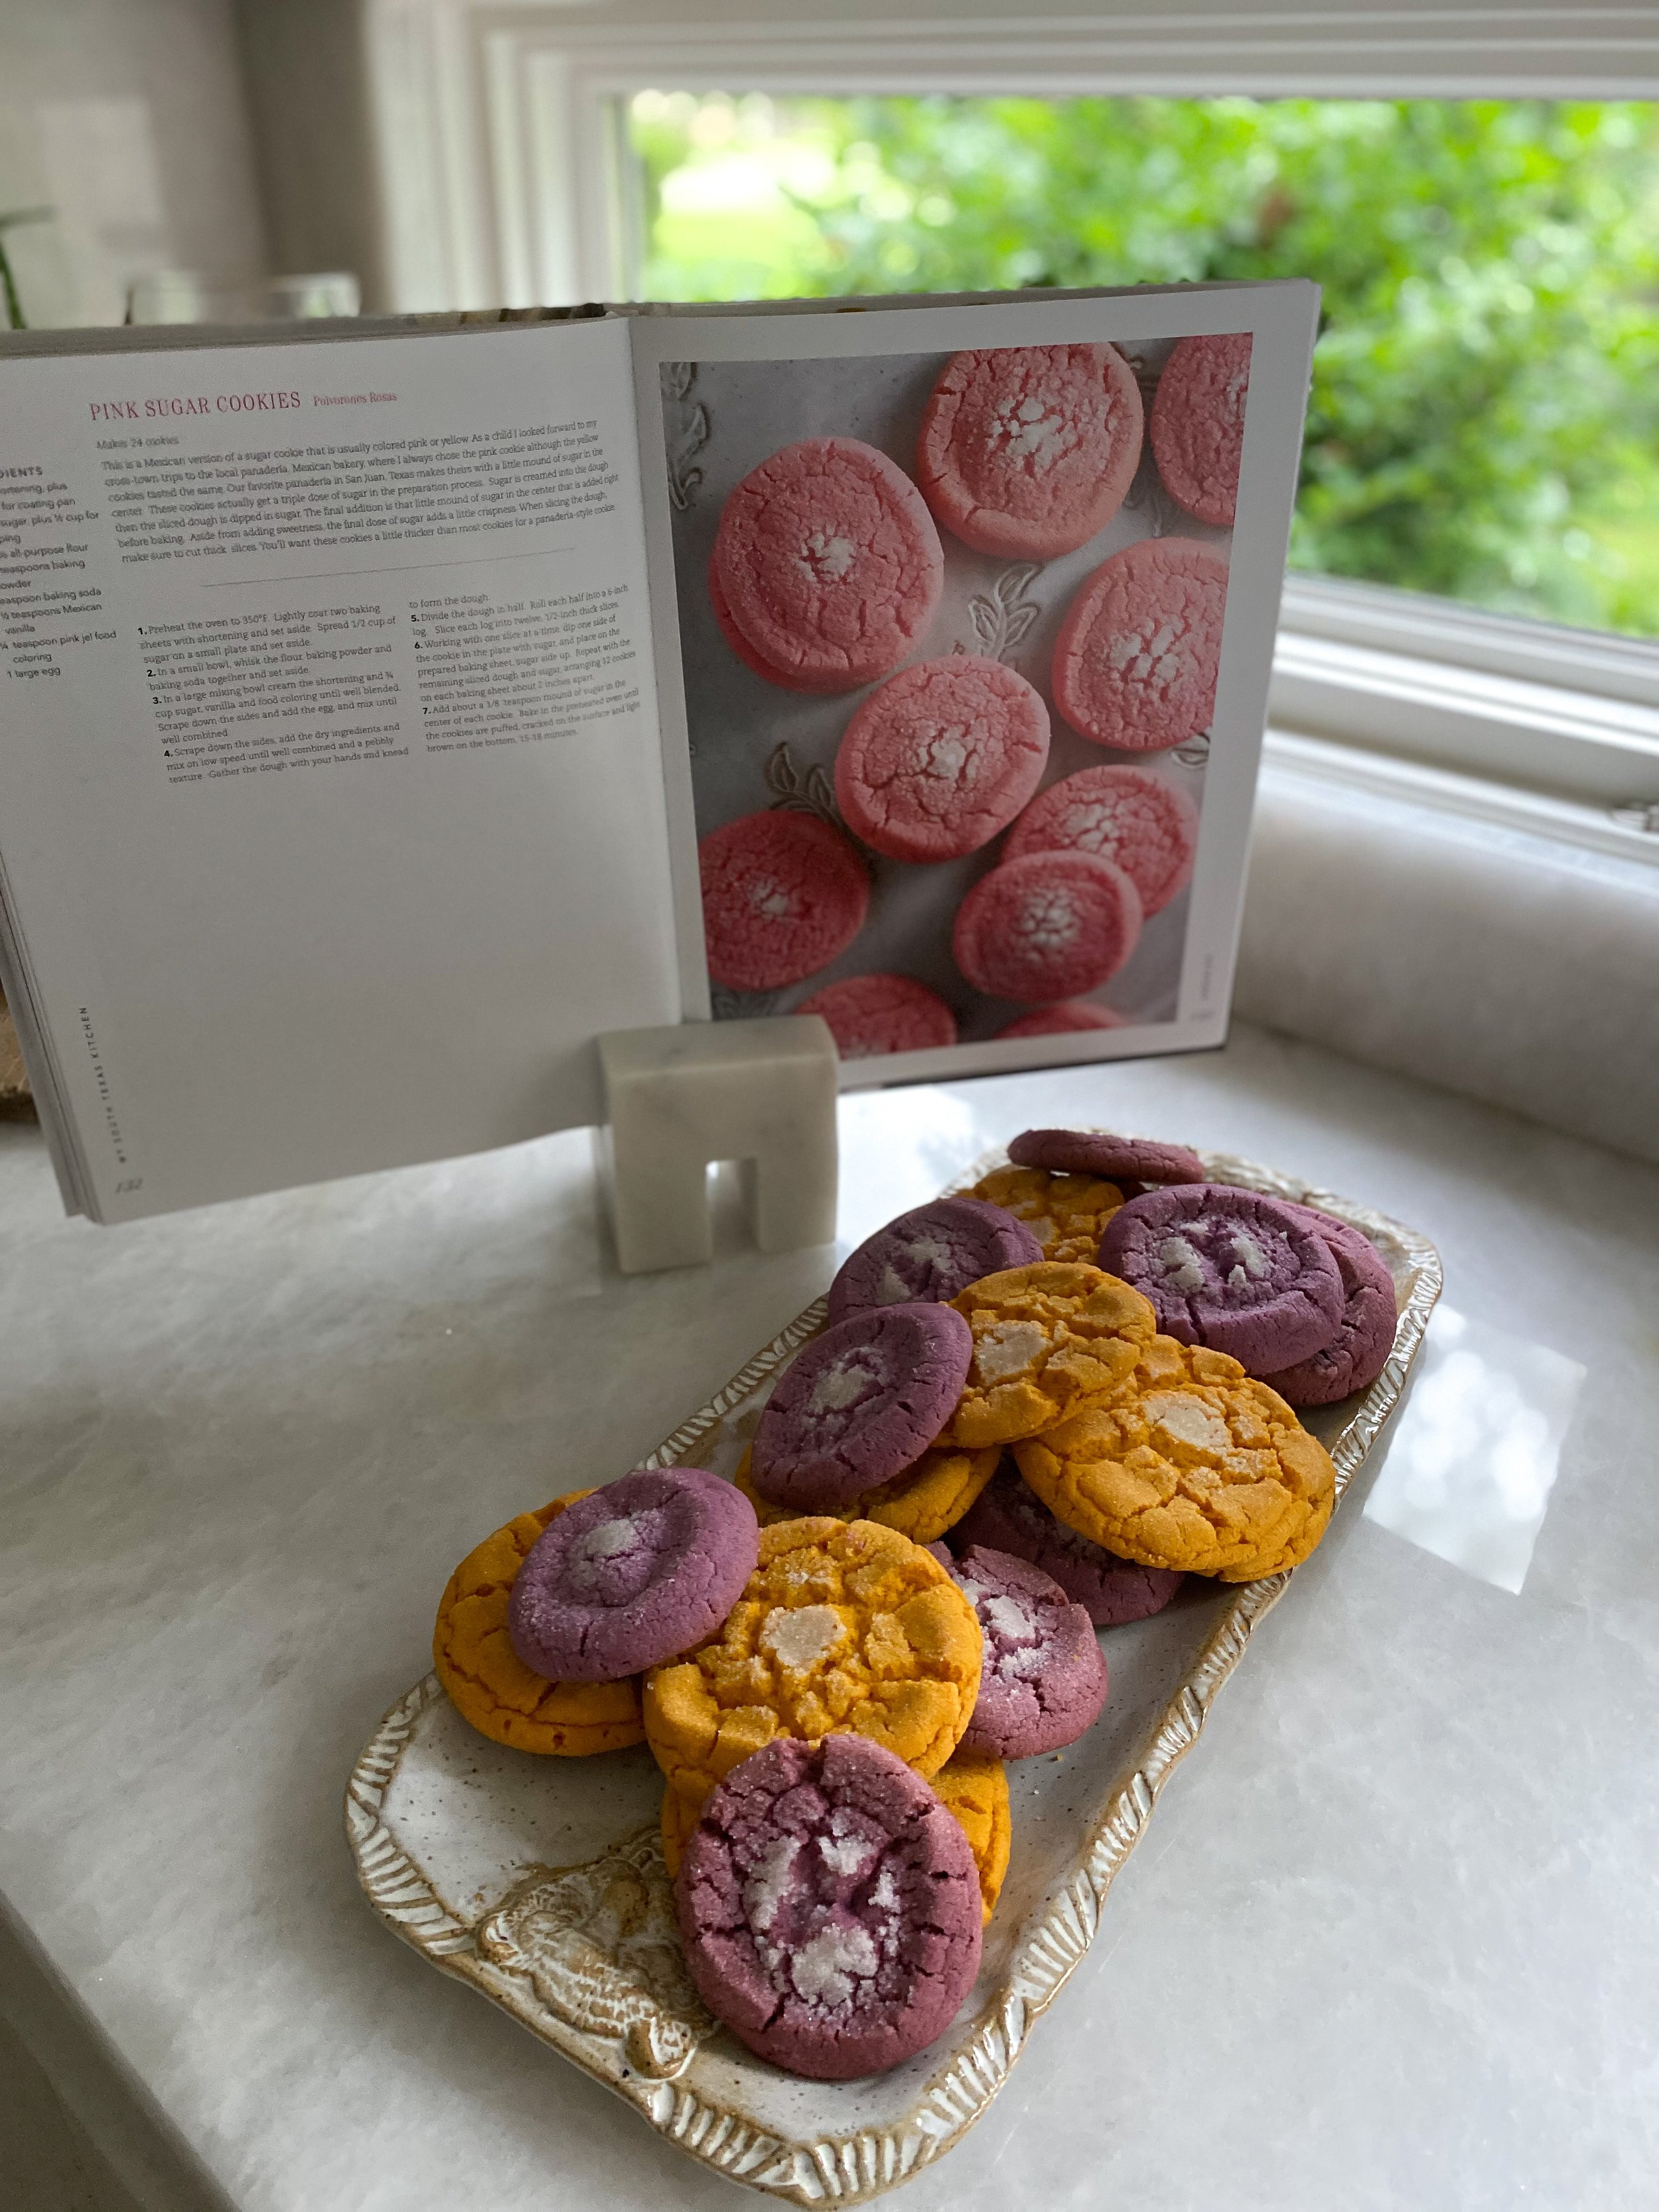 Pink Cookie Recipe - Banned Recipe in Elyria, OH - Speakeasy at